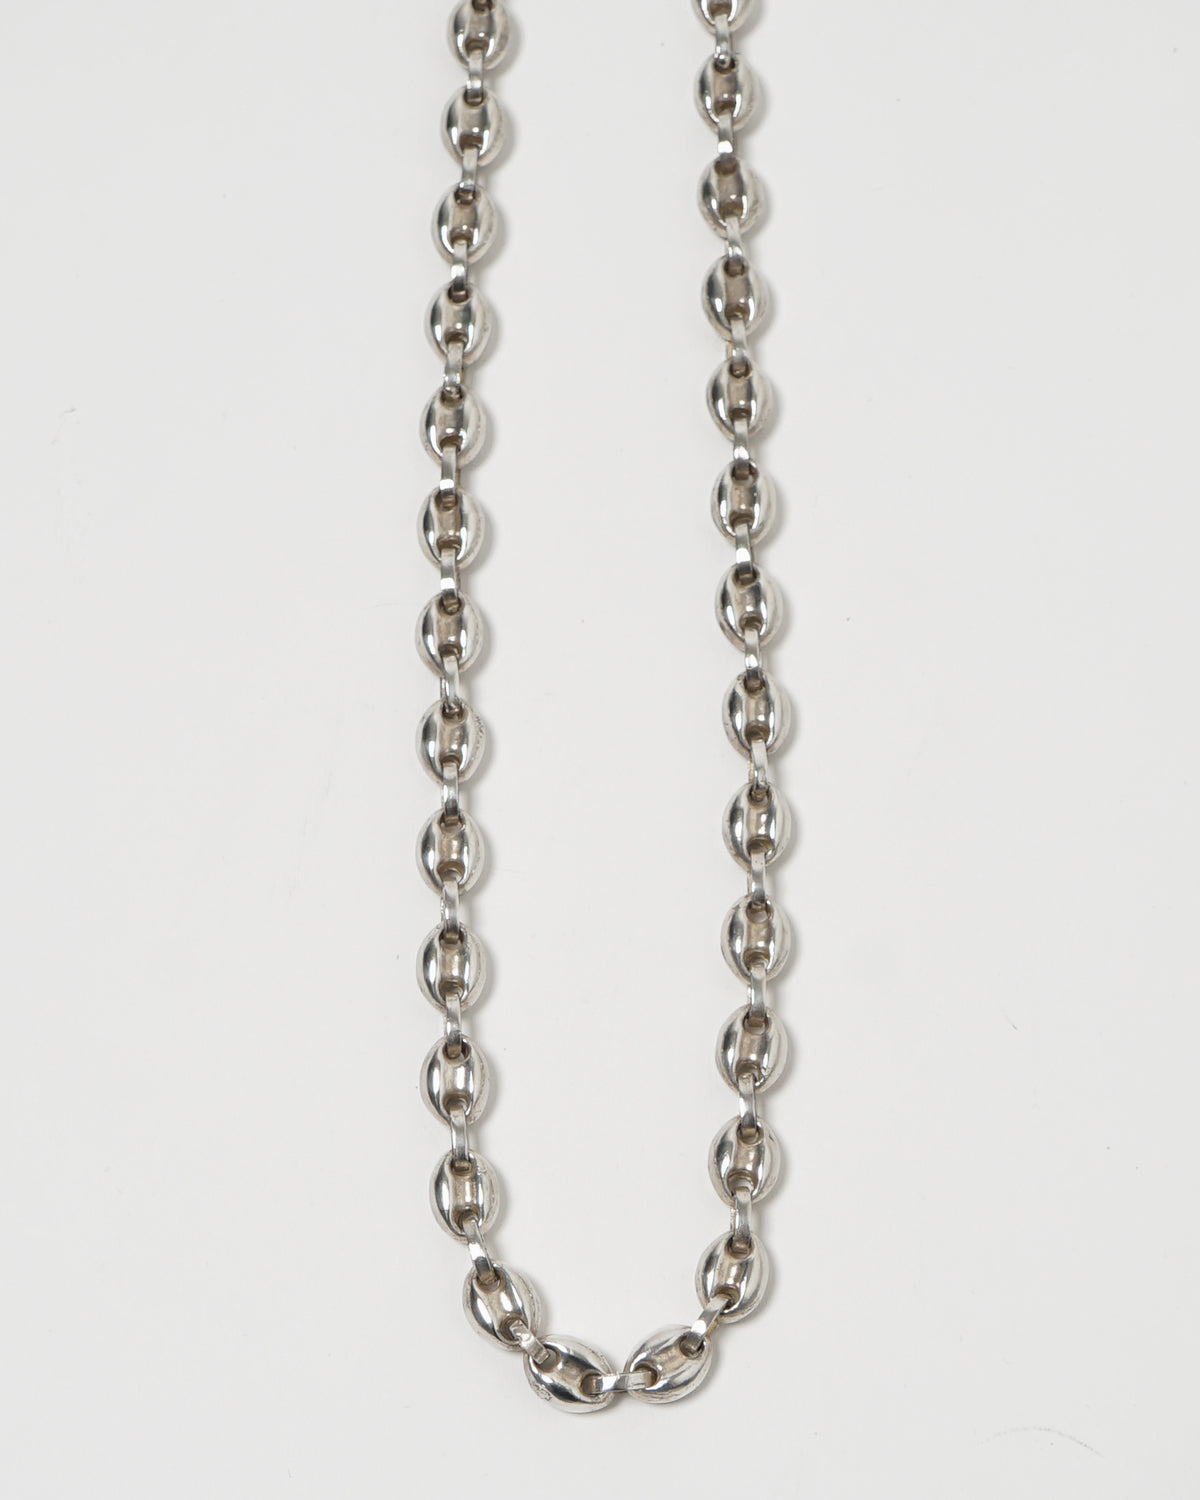 Silver Anchor Chain Necklace